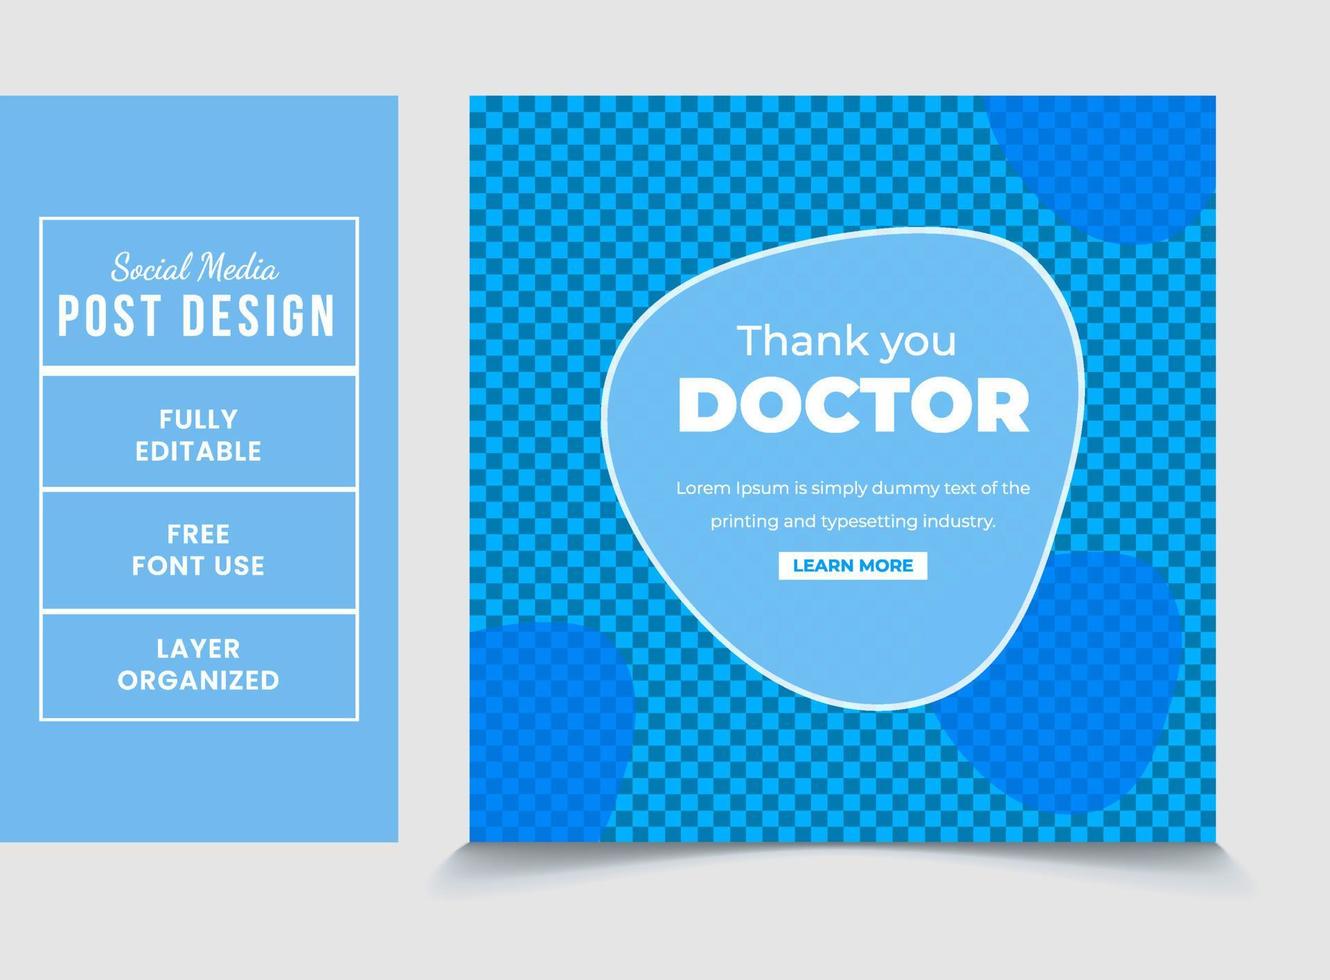 Medical healthcare services square video web thumbnail design eps vector file